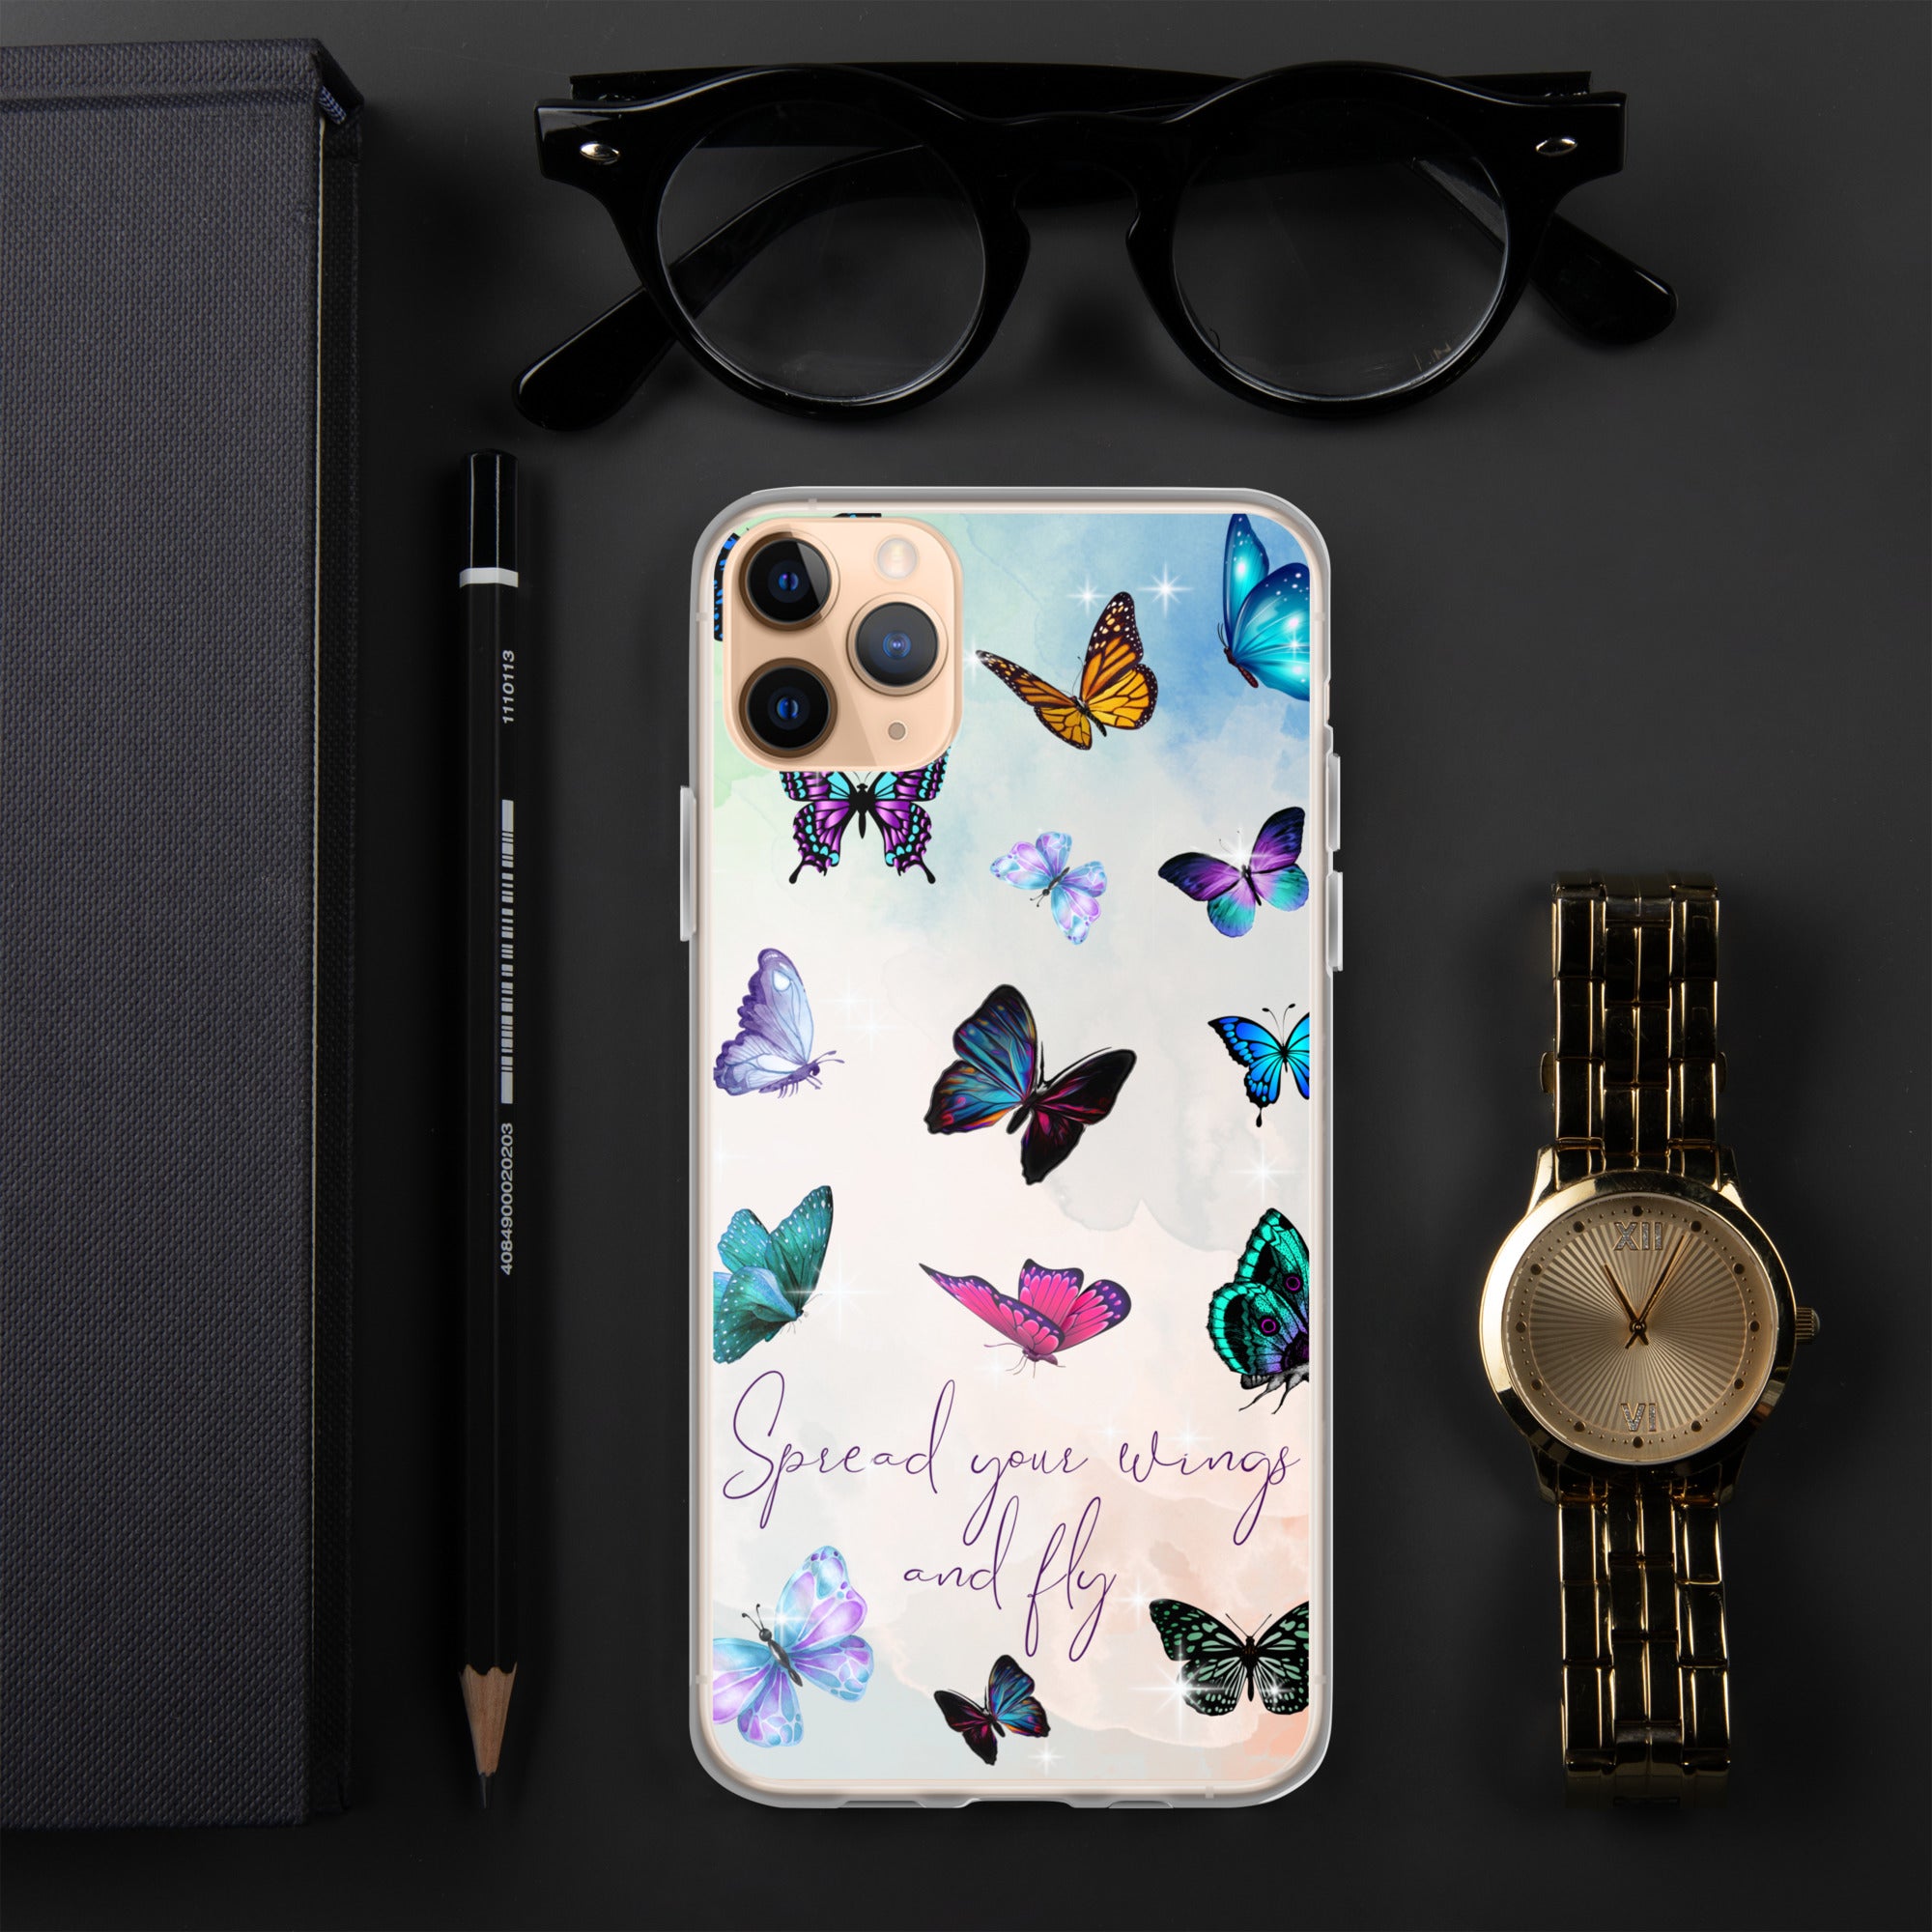 Butterfly Phone Case, Fashion Design Phone Case, Soft Silicone Case for iPhone 13 Case, iPhone 12 Case, iPhone 11 Case, iPhone Case Gift